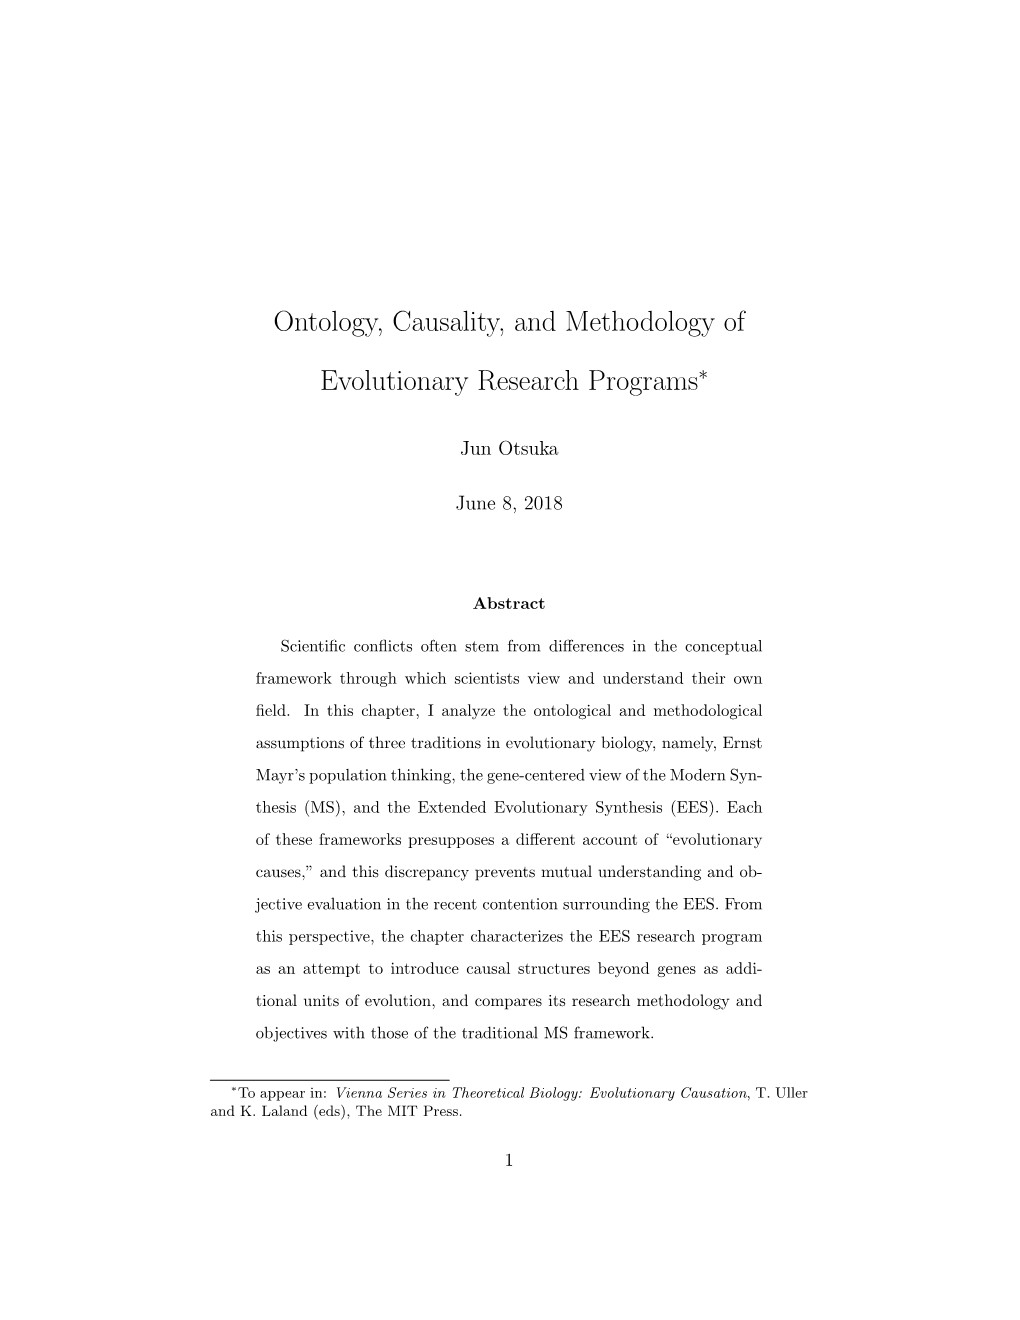 Ontology, Causality, and Methodology of Evolutionary Research Programs